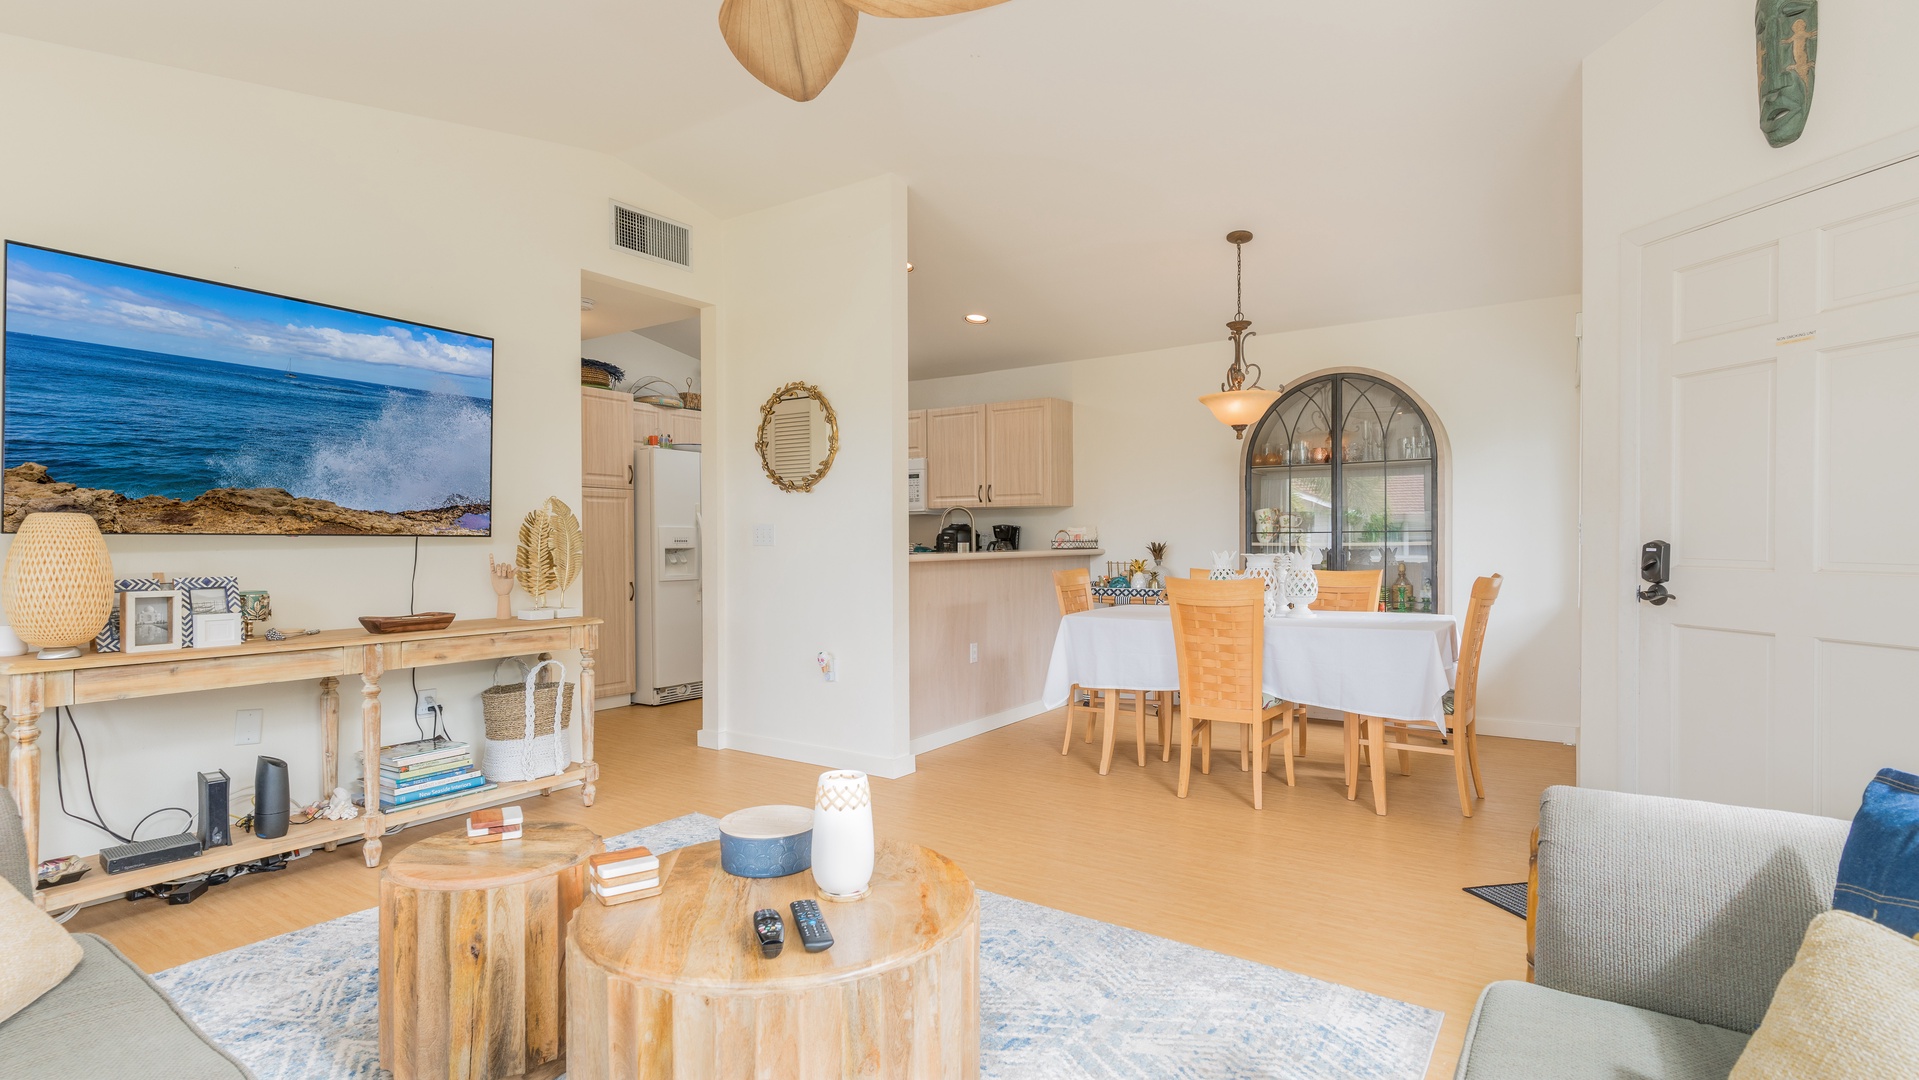 Kapolei Vacation Rentals, Fairways at Ko Olina 4A - Expansive space includes kitchen, dining and living areas.